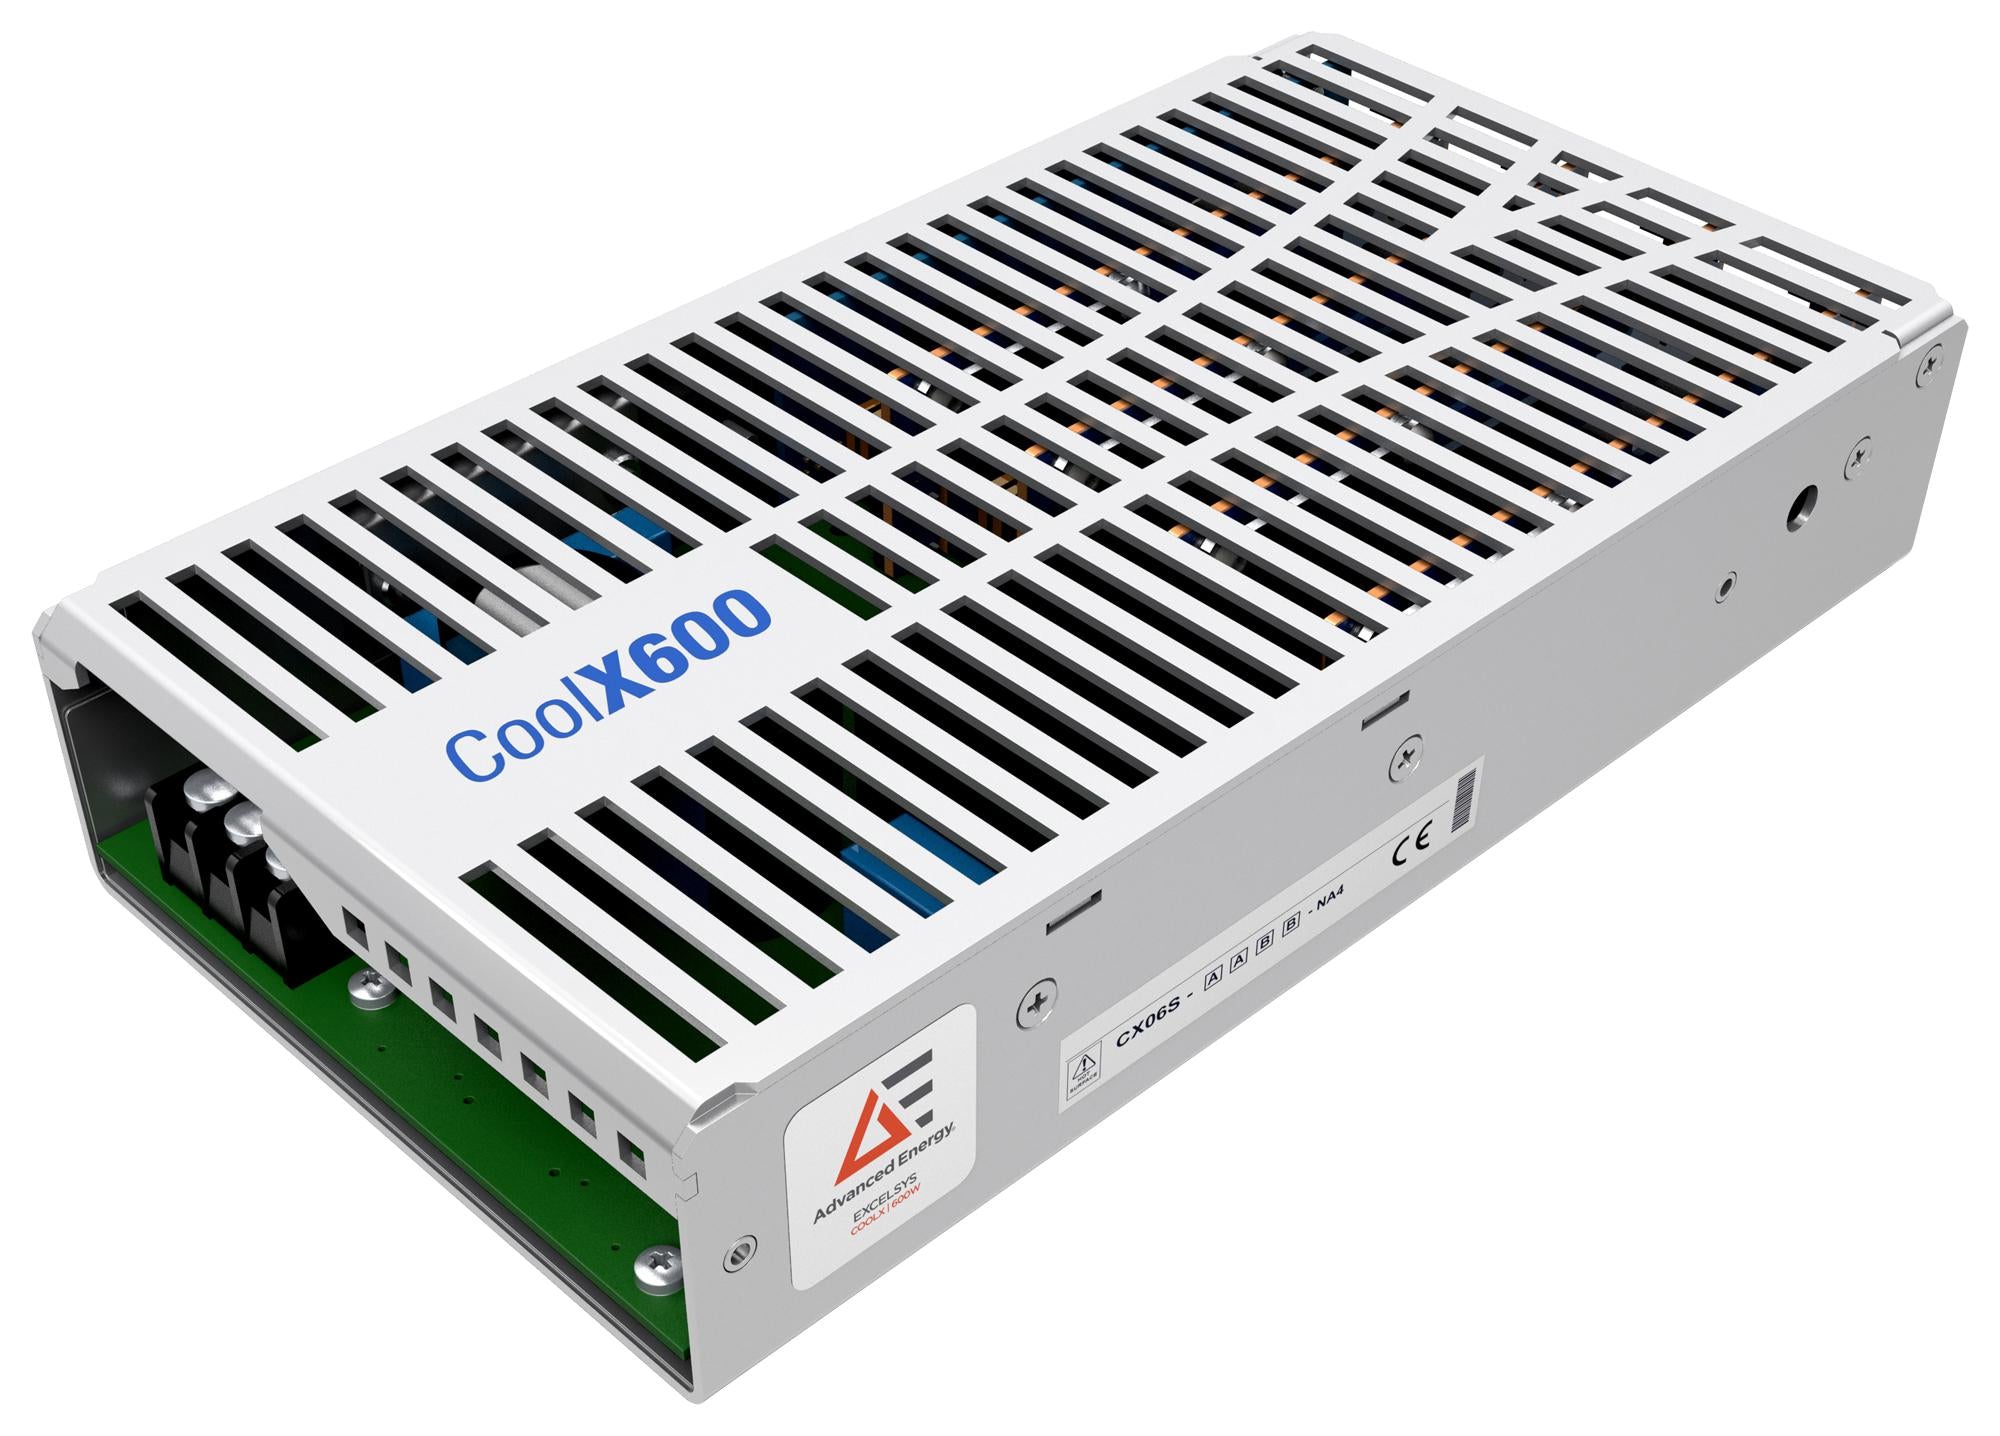 CX06M-0000-N-A CONFIGURABLE POWER COOLPAC 4SLOT CHASSIS ADVANCED ENERGY